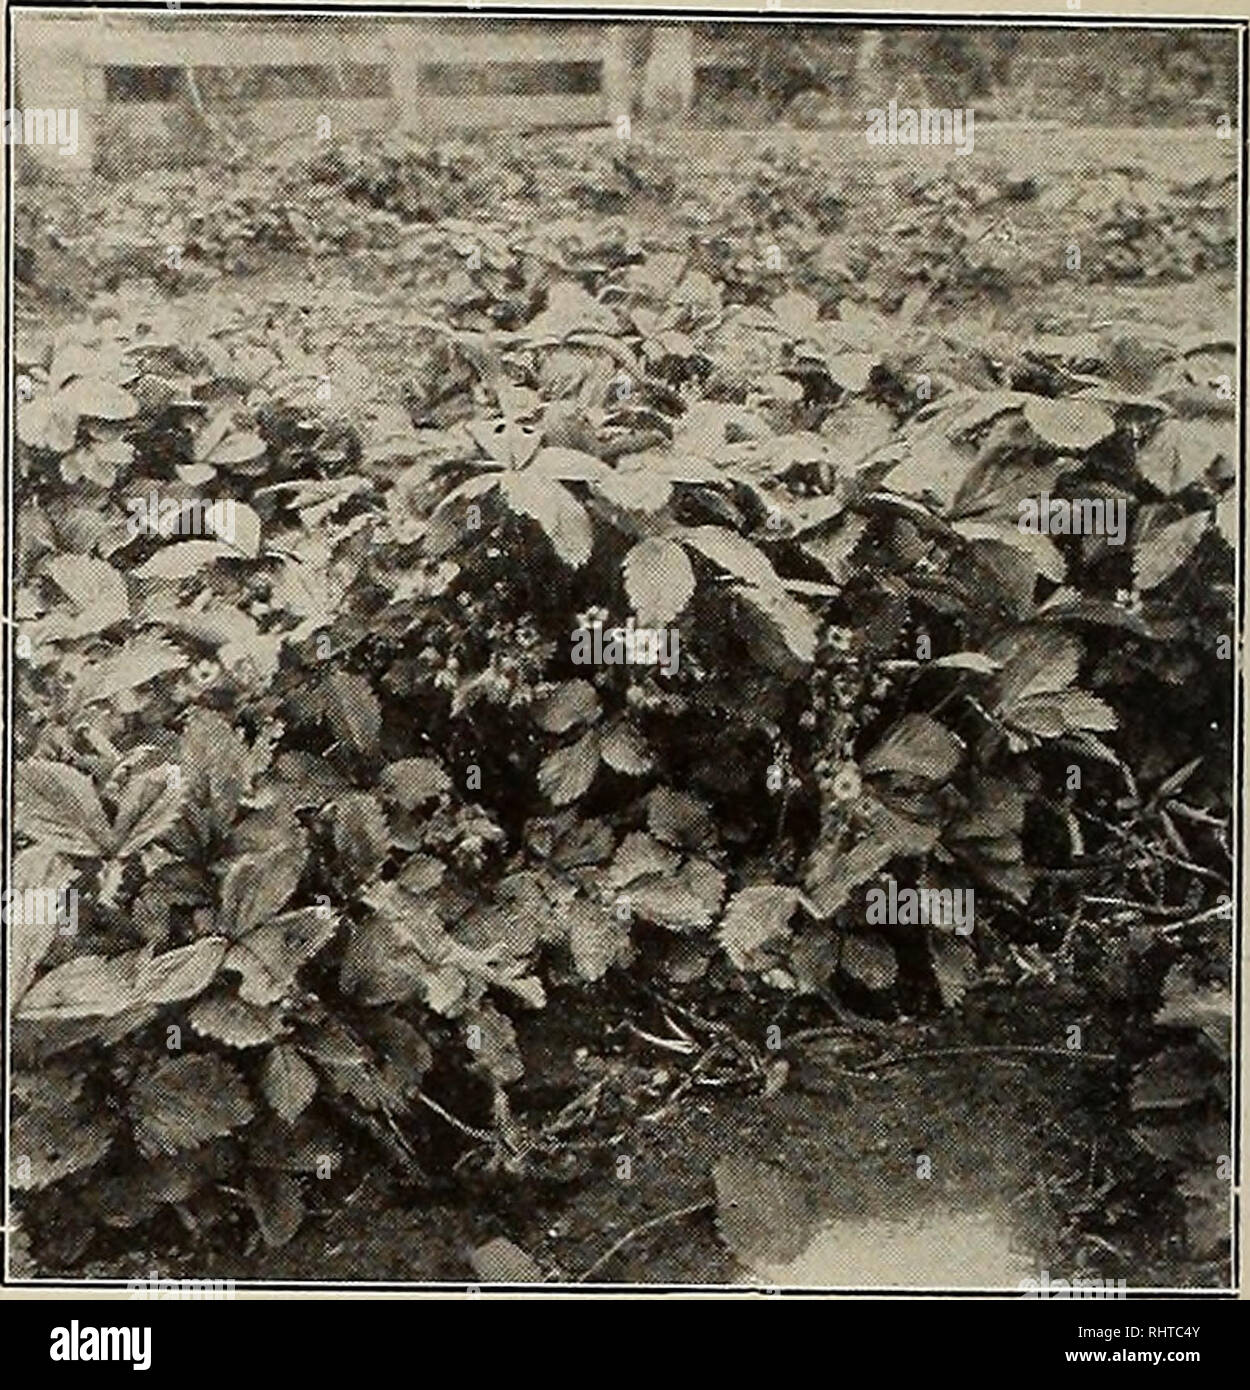 . Better fruit. Fruit-culture. CLARK SEEDLING STRAWBERRIES FROM Photograph by C. C. Hutchins WHITE SALMON VALLEY, WASHINGTON a cultivation at this time, or other times, succeeds in destroying some of the cod- ling moth larvae which are occasionally known to enter cracks and hiding places in the earth near the base of the trees. The thinning of overloaded trees in the summer is often an opportunity for removing apples bearing these insects, and the destruction of such apples and worms at least may prevent their further damage and leave a higher per cent of perfect fruit upon the tree. There are Stock Photo